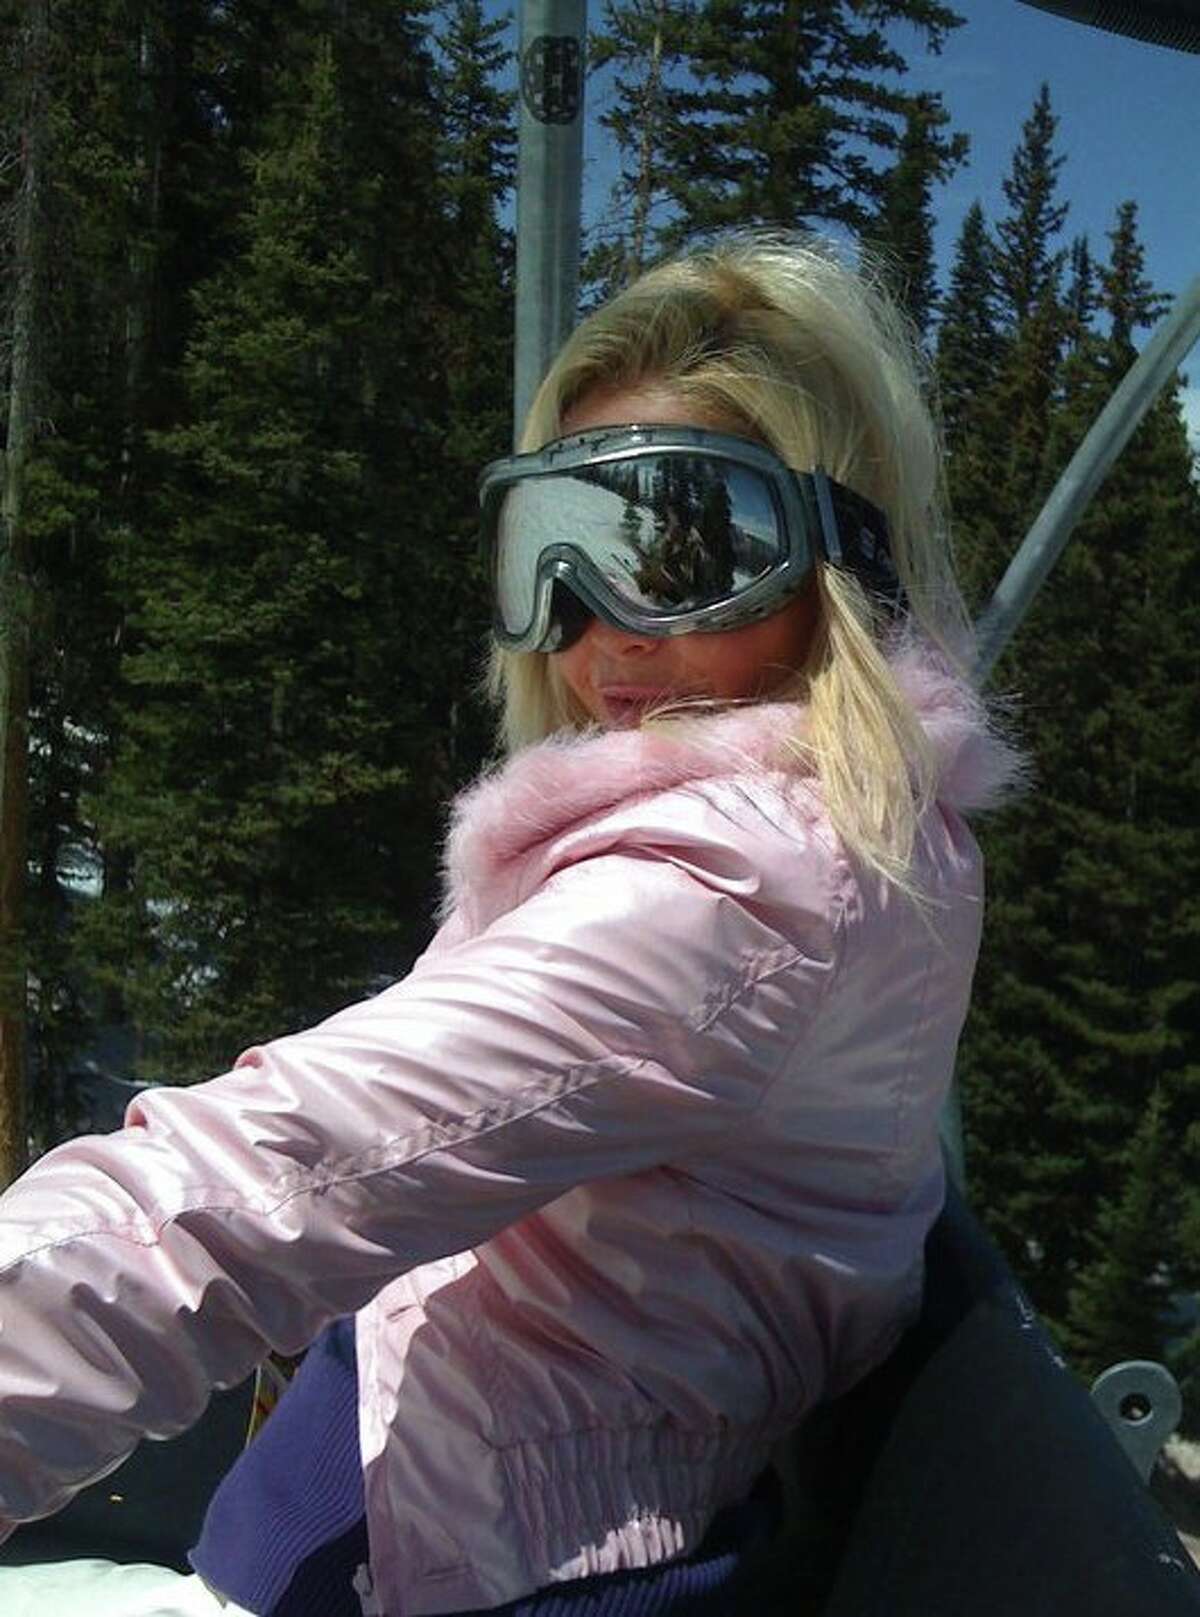 This photo is from Helen Kapoutsos' Facebook Page which indicates she lives in Aspen, Colorado, the ski resort town she told arresting officers in Massachusetts she lived in.